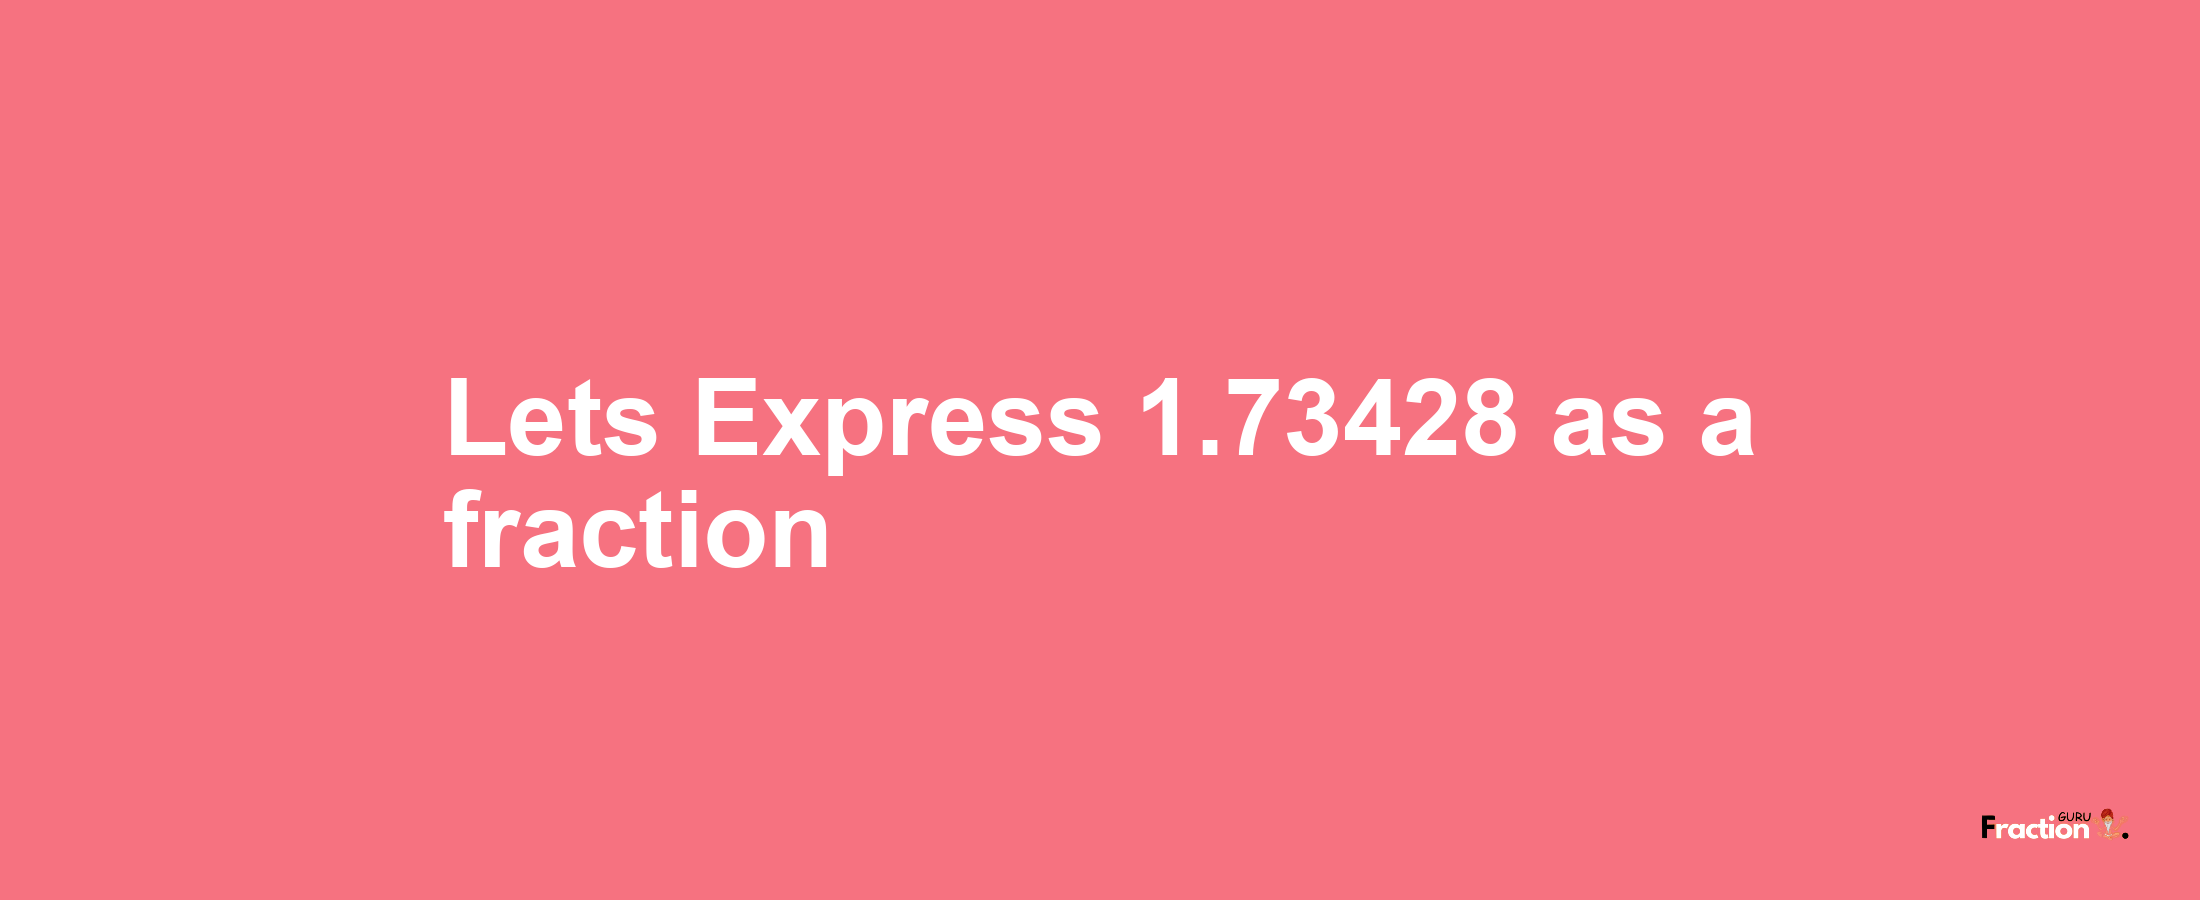 Lets Express 1.73428 as afraction